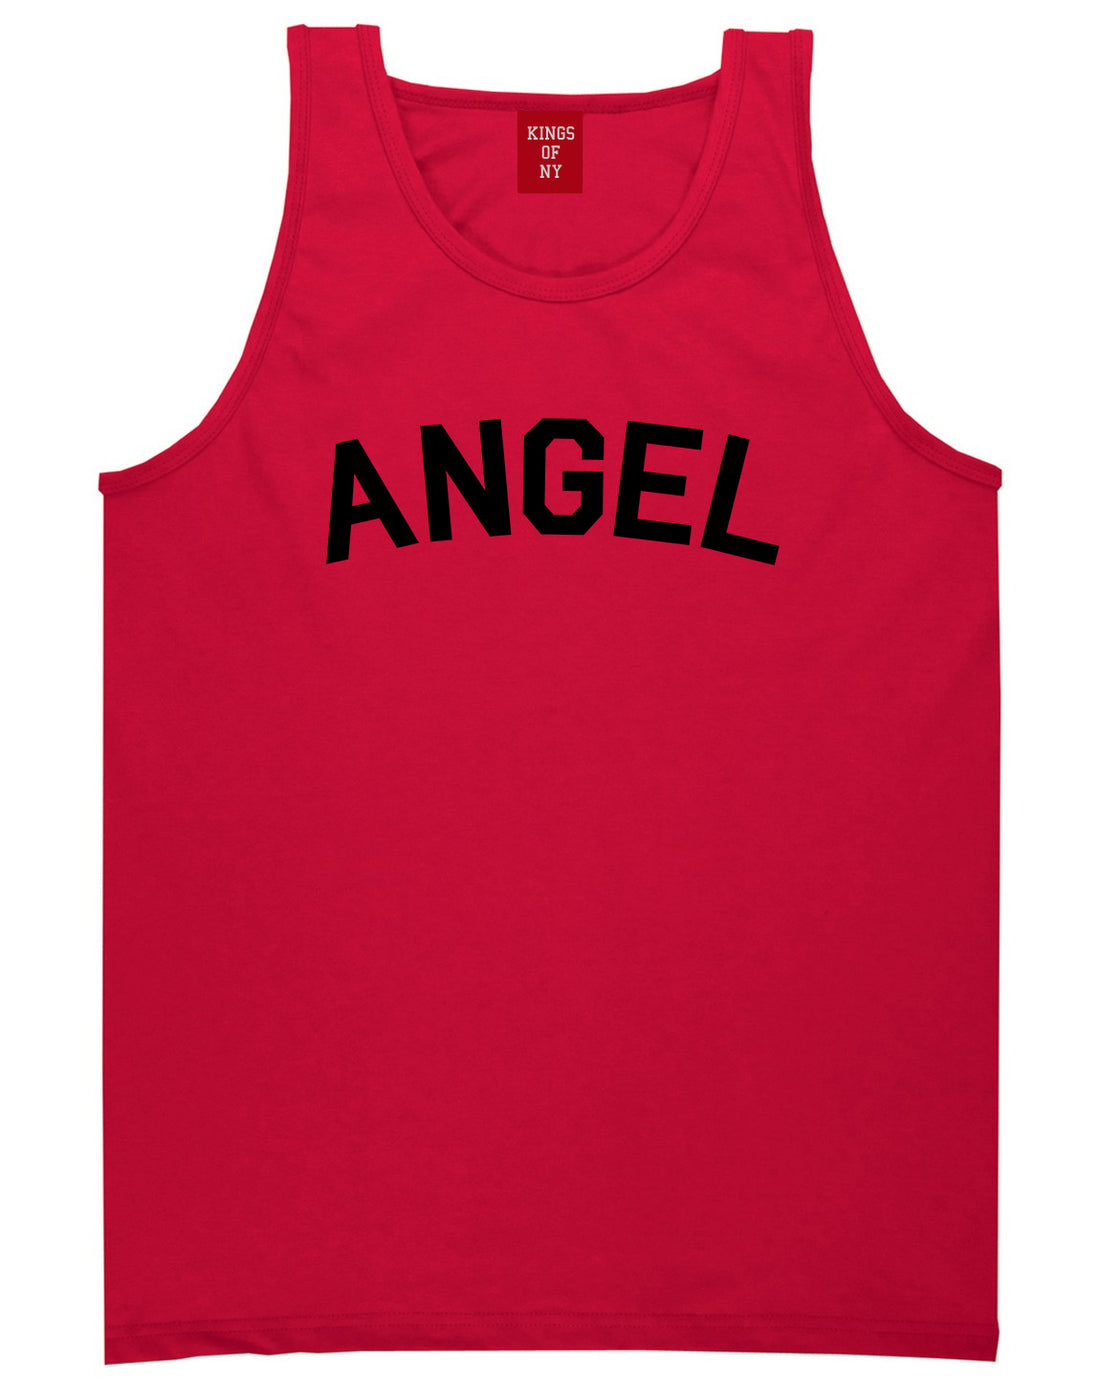 Angel Arch Good Tank Top Shirt in Red